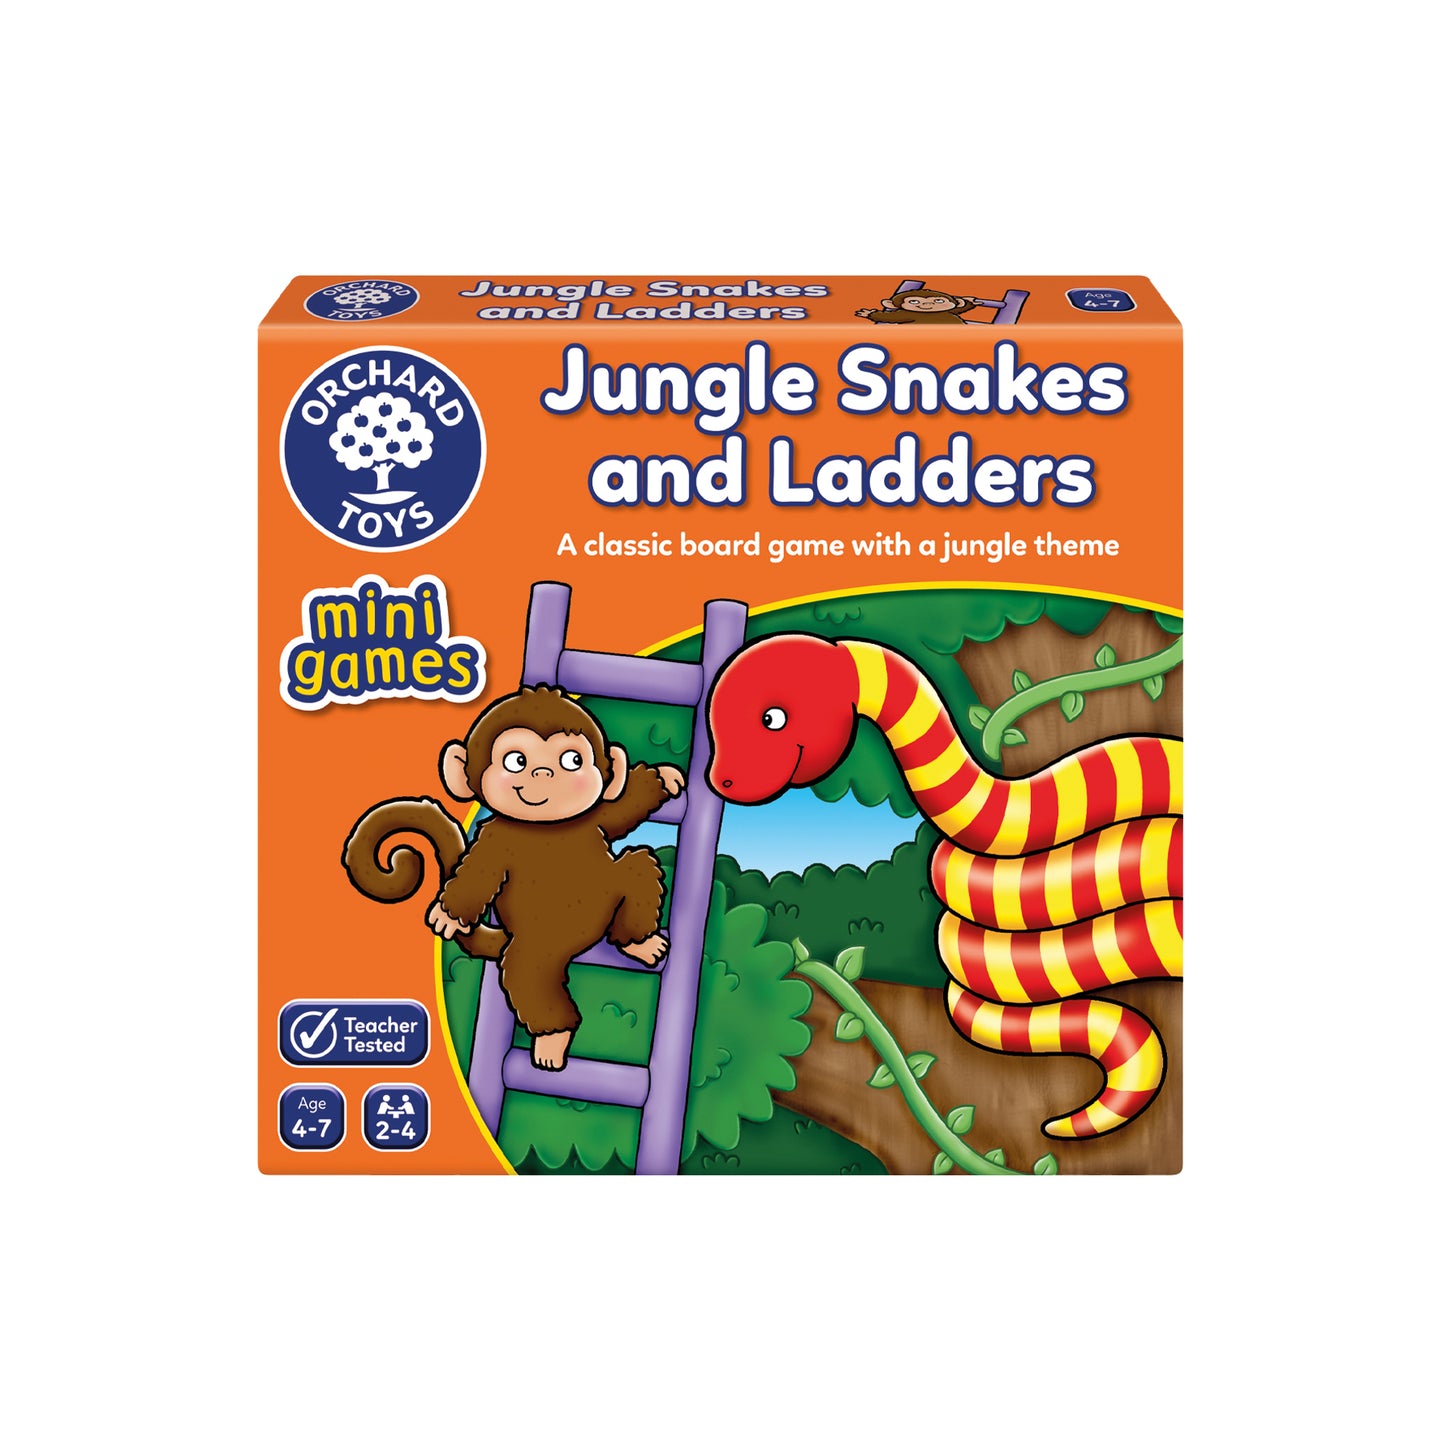 Orchard Toys Jungle Snakes and Ladders Mini Game